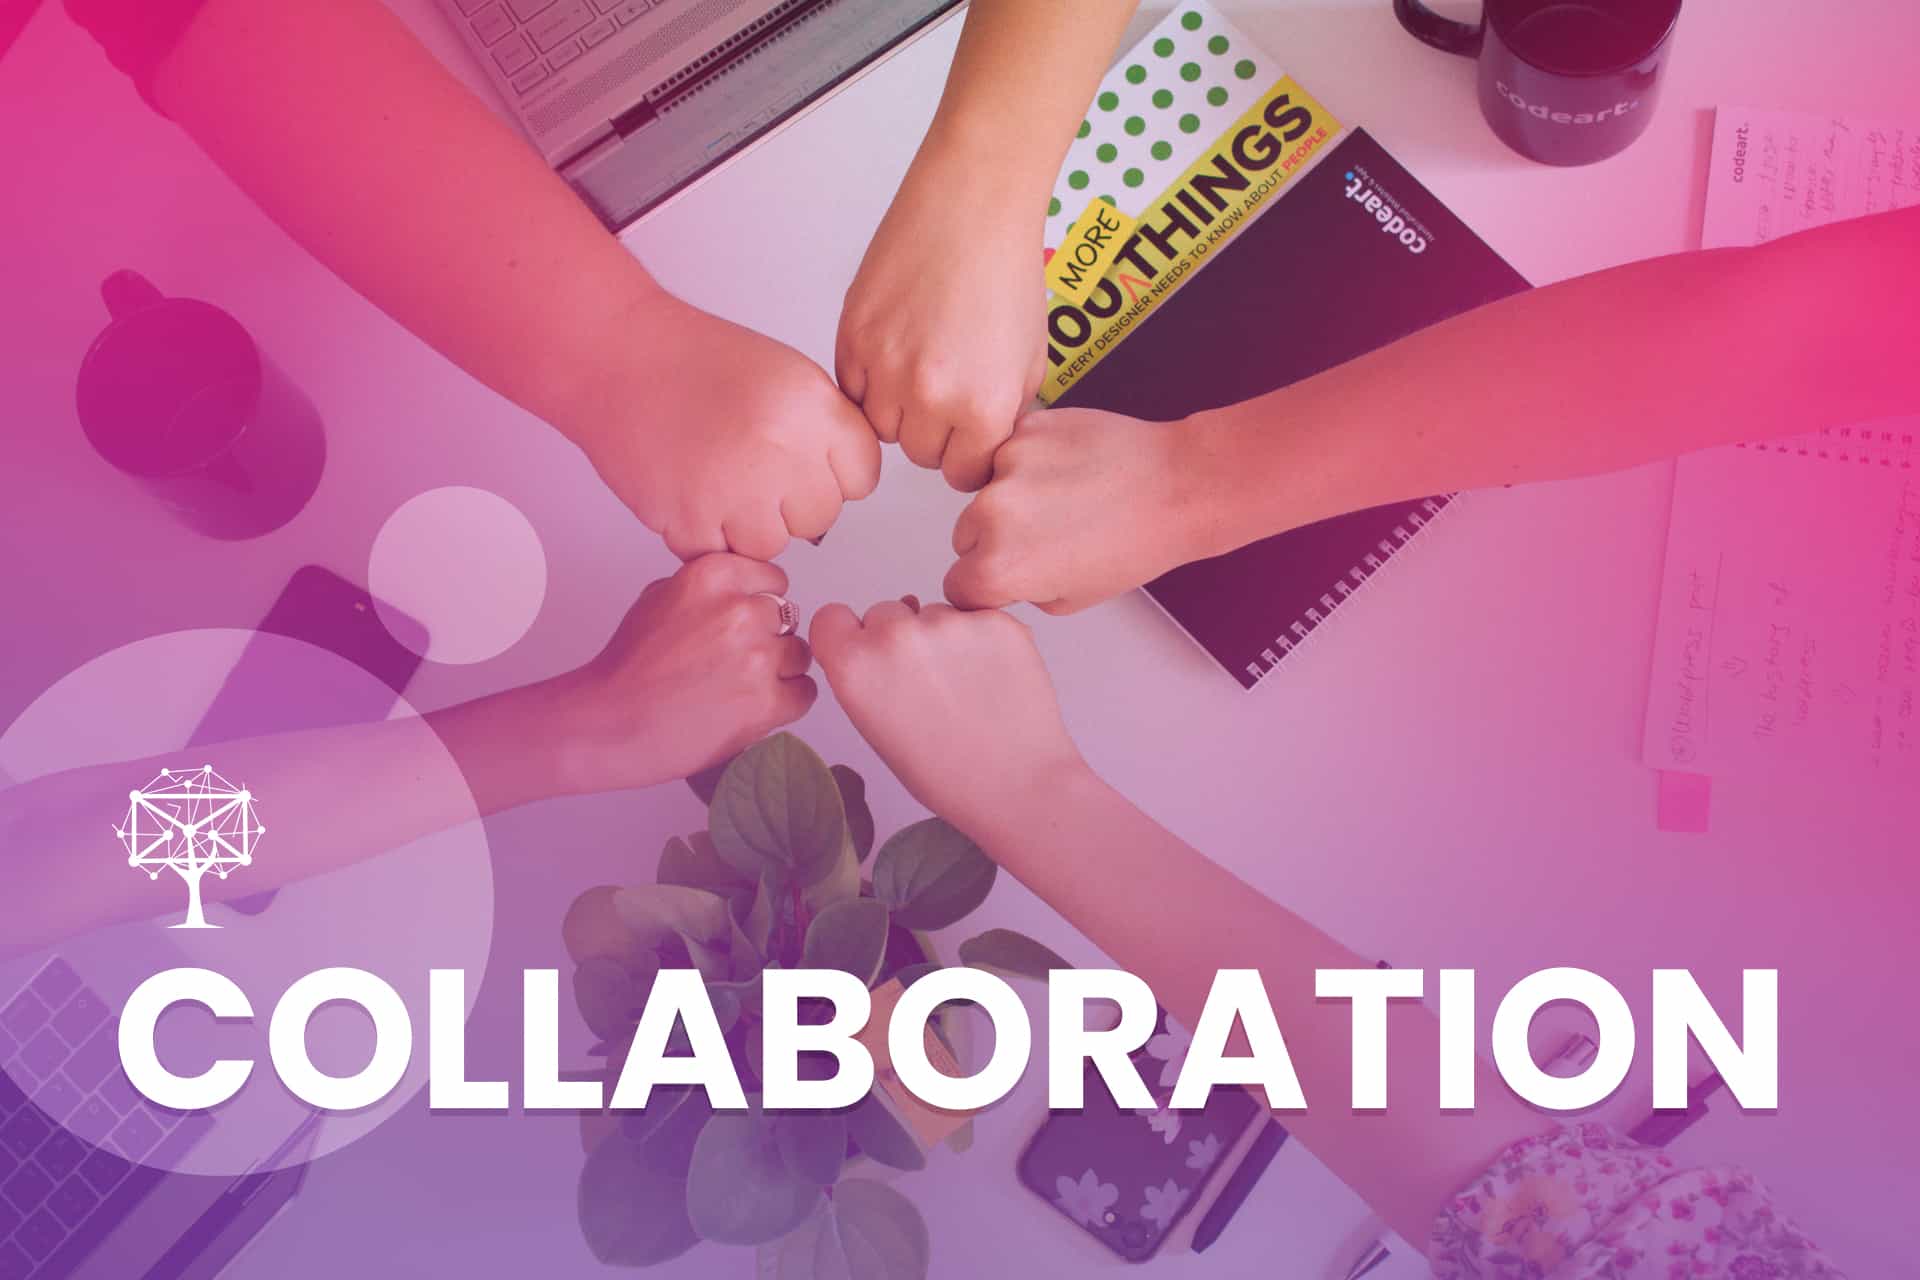 Collaboration is a customer service skill